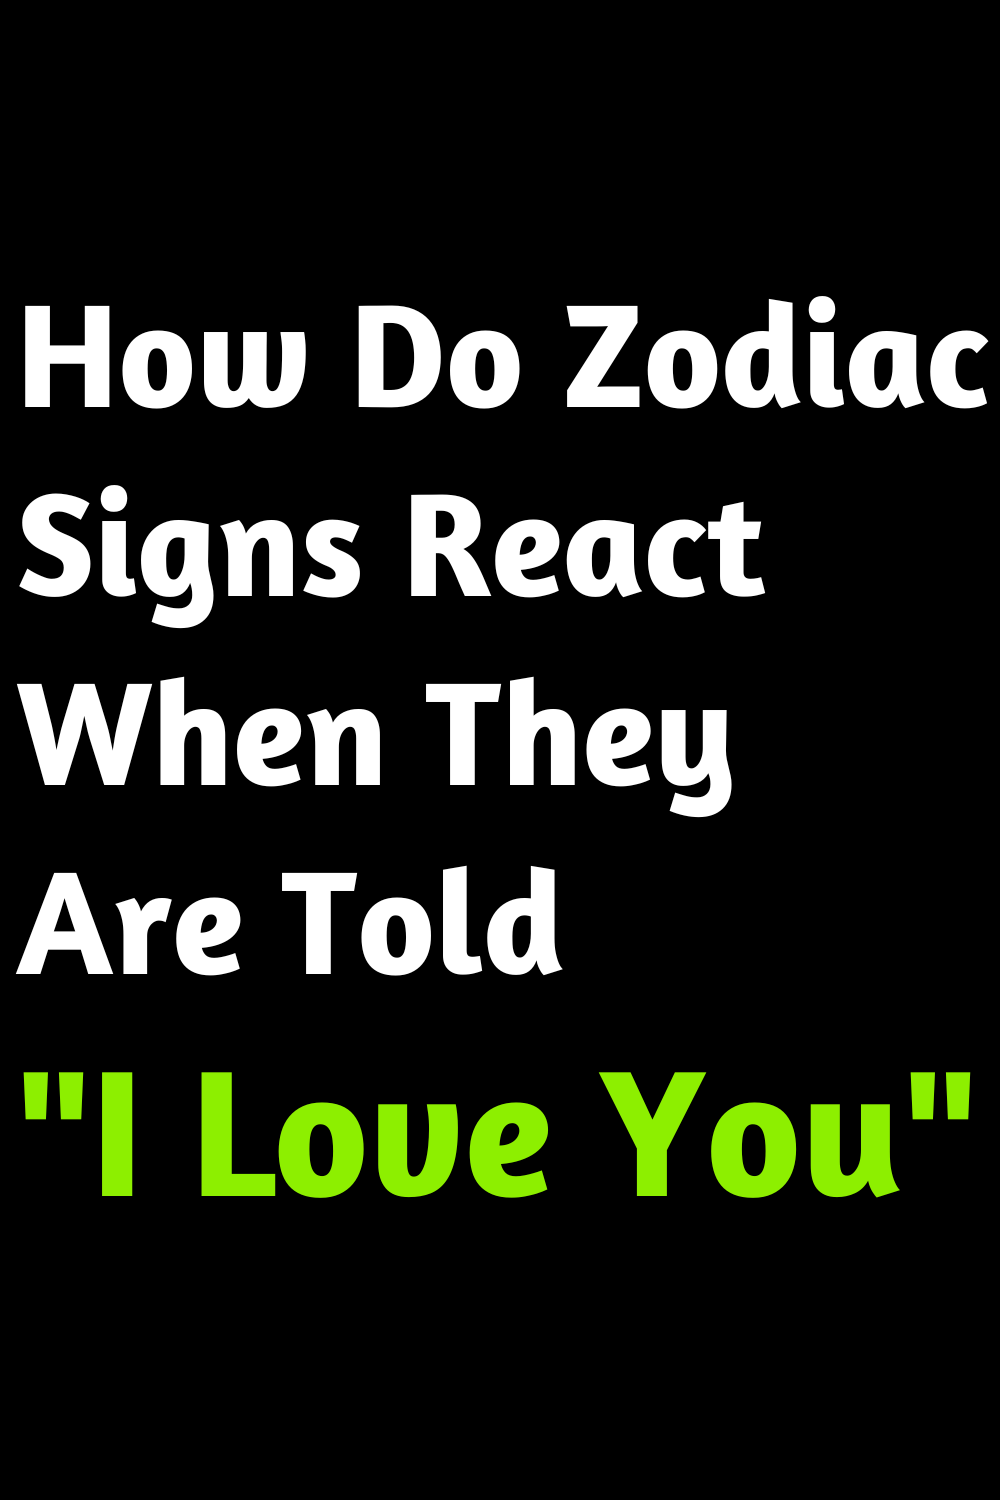 How Do Zodiac Signs React When They Are Told "I Love You"